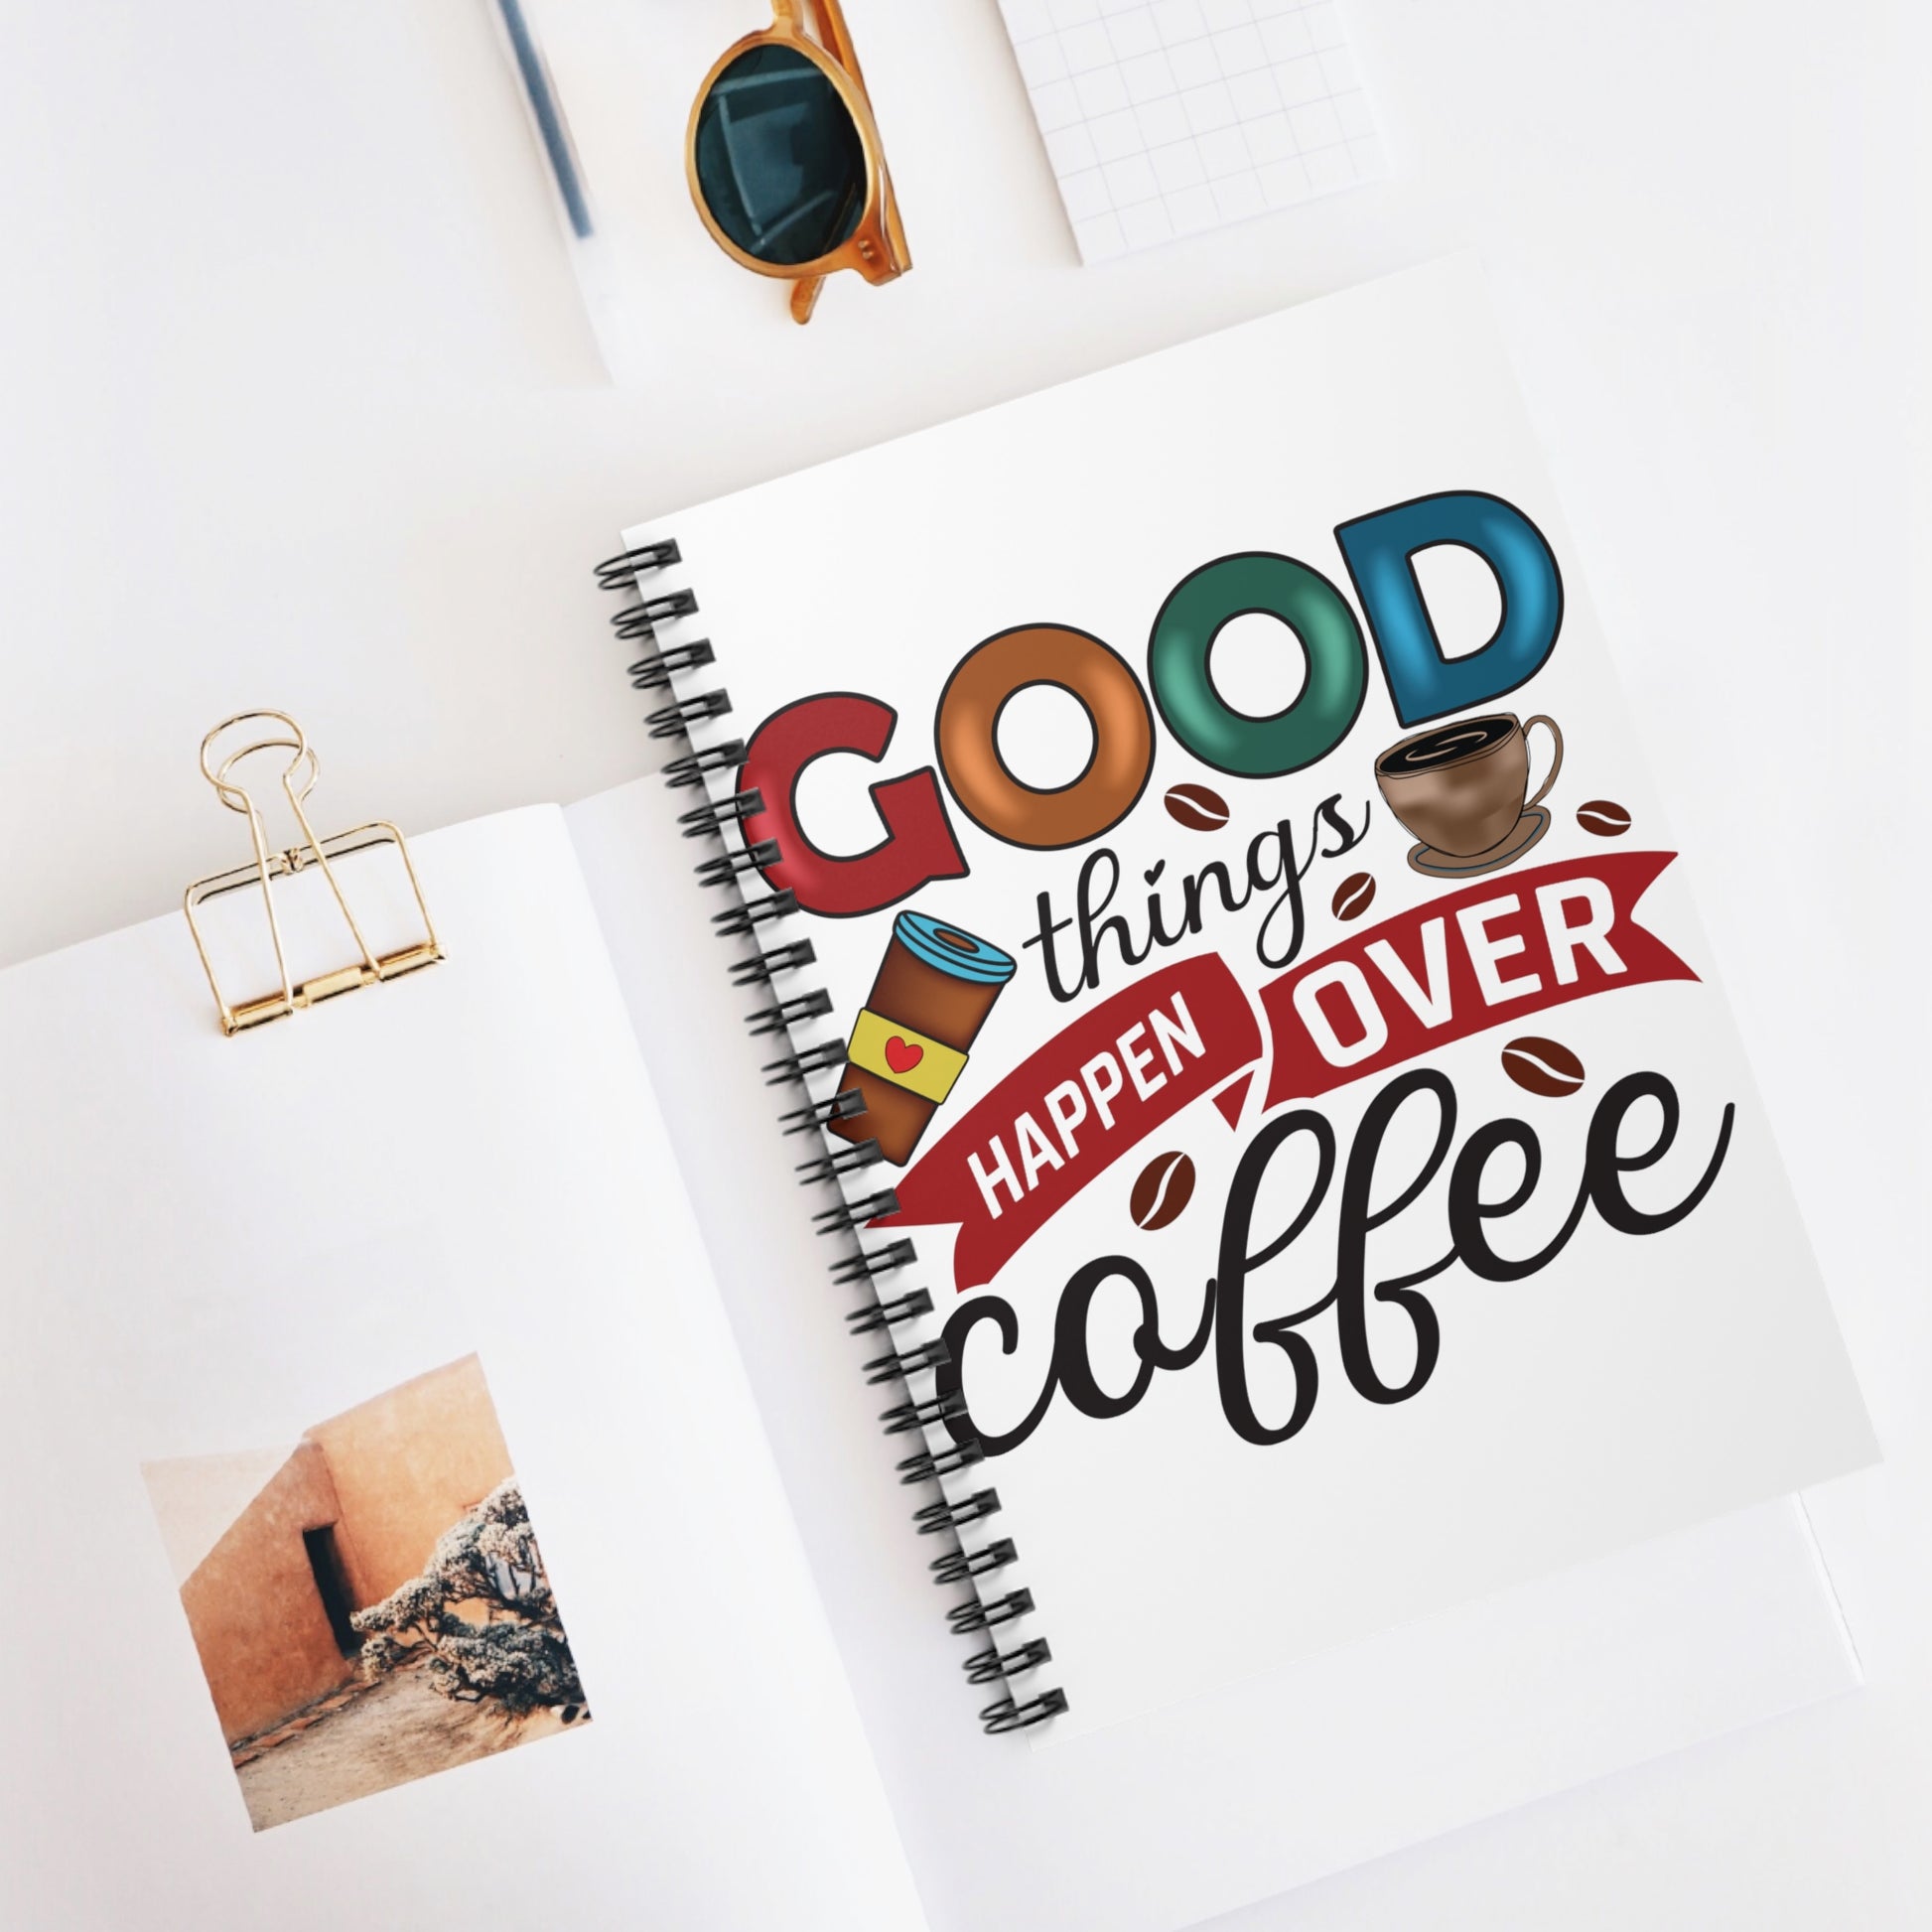 Good Things Coffee: Spiral Notebook - Log Books - Journals - Diaries - and More Custom Printed by TheGlassyLass